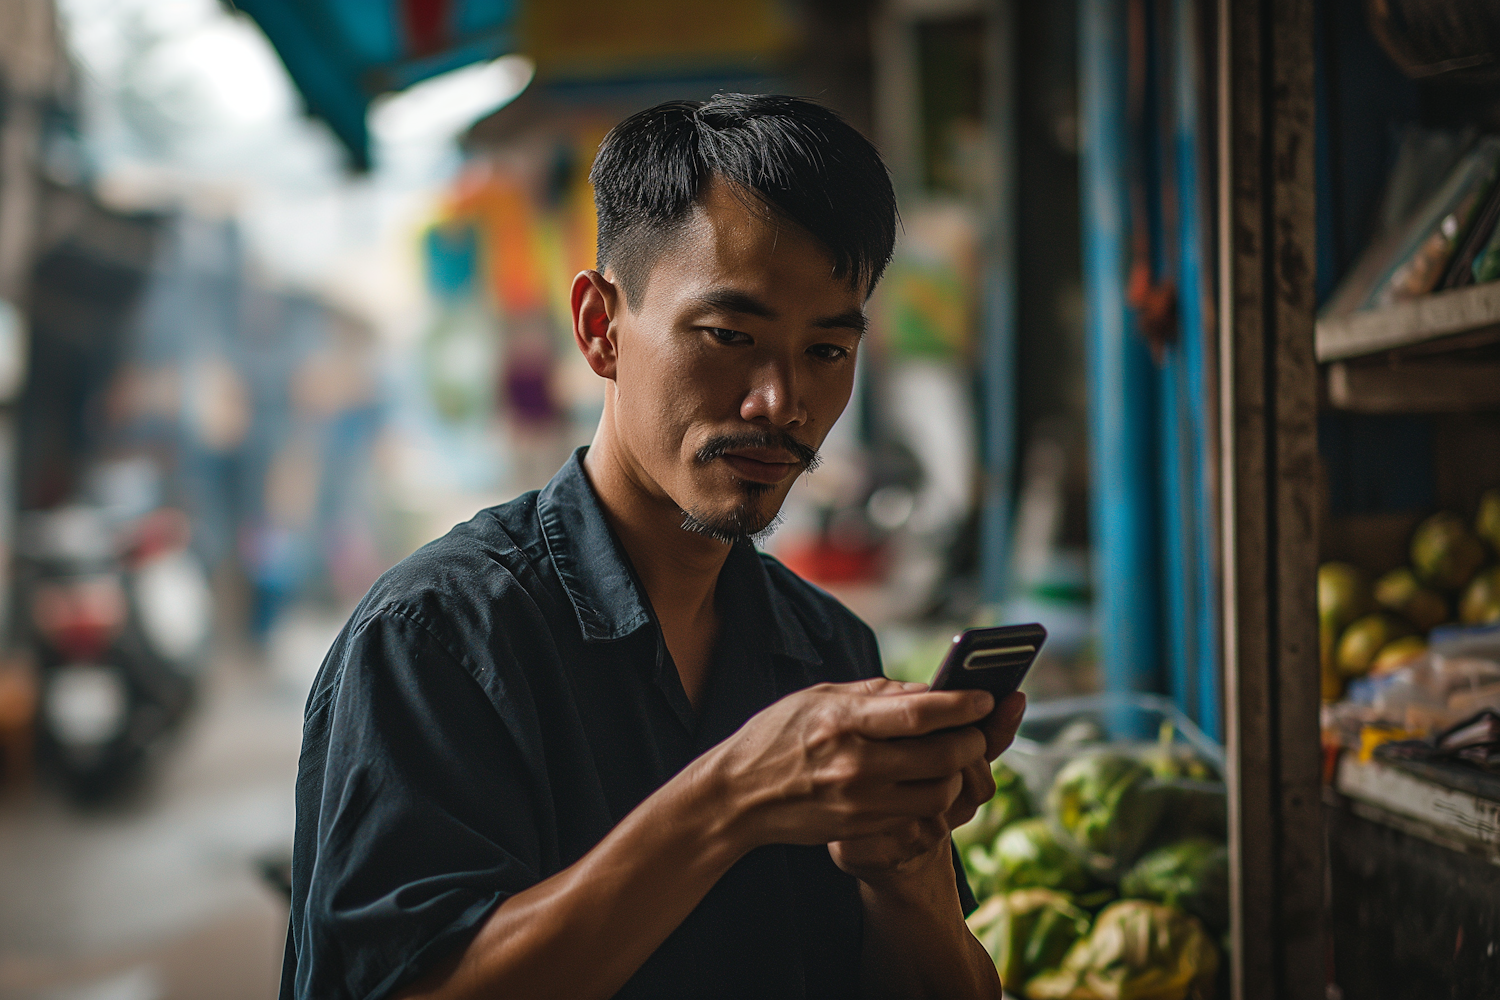 Asian Man Concentrated on Smartphone at Market